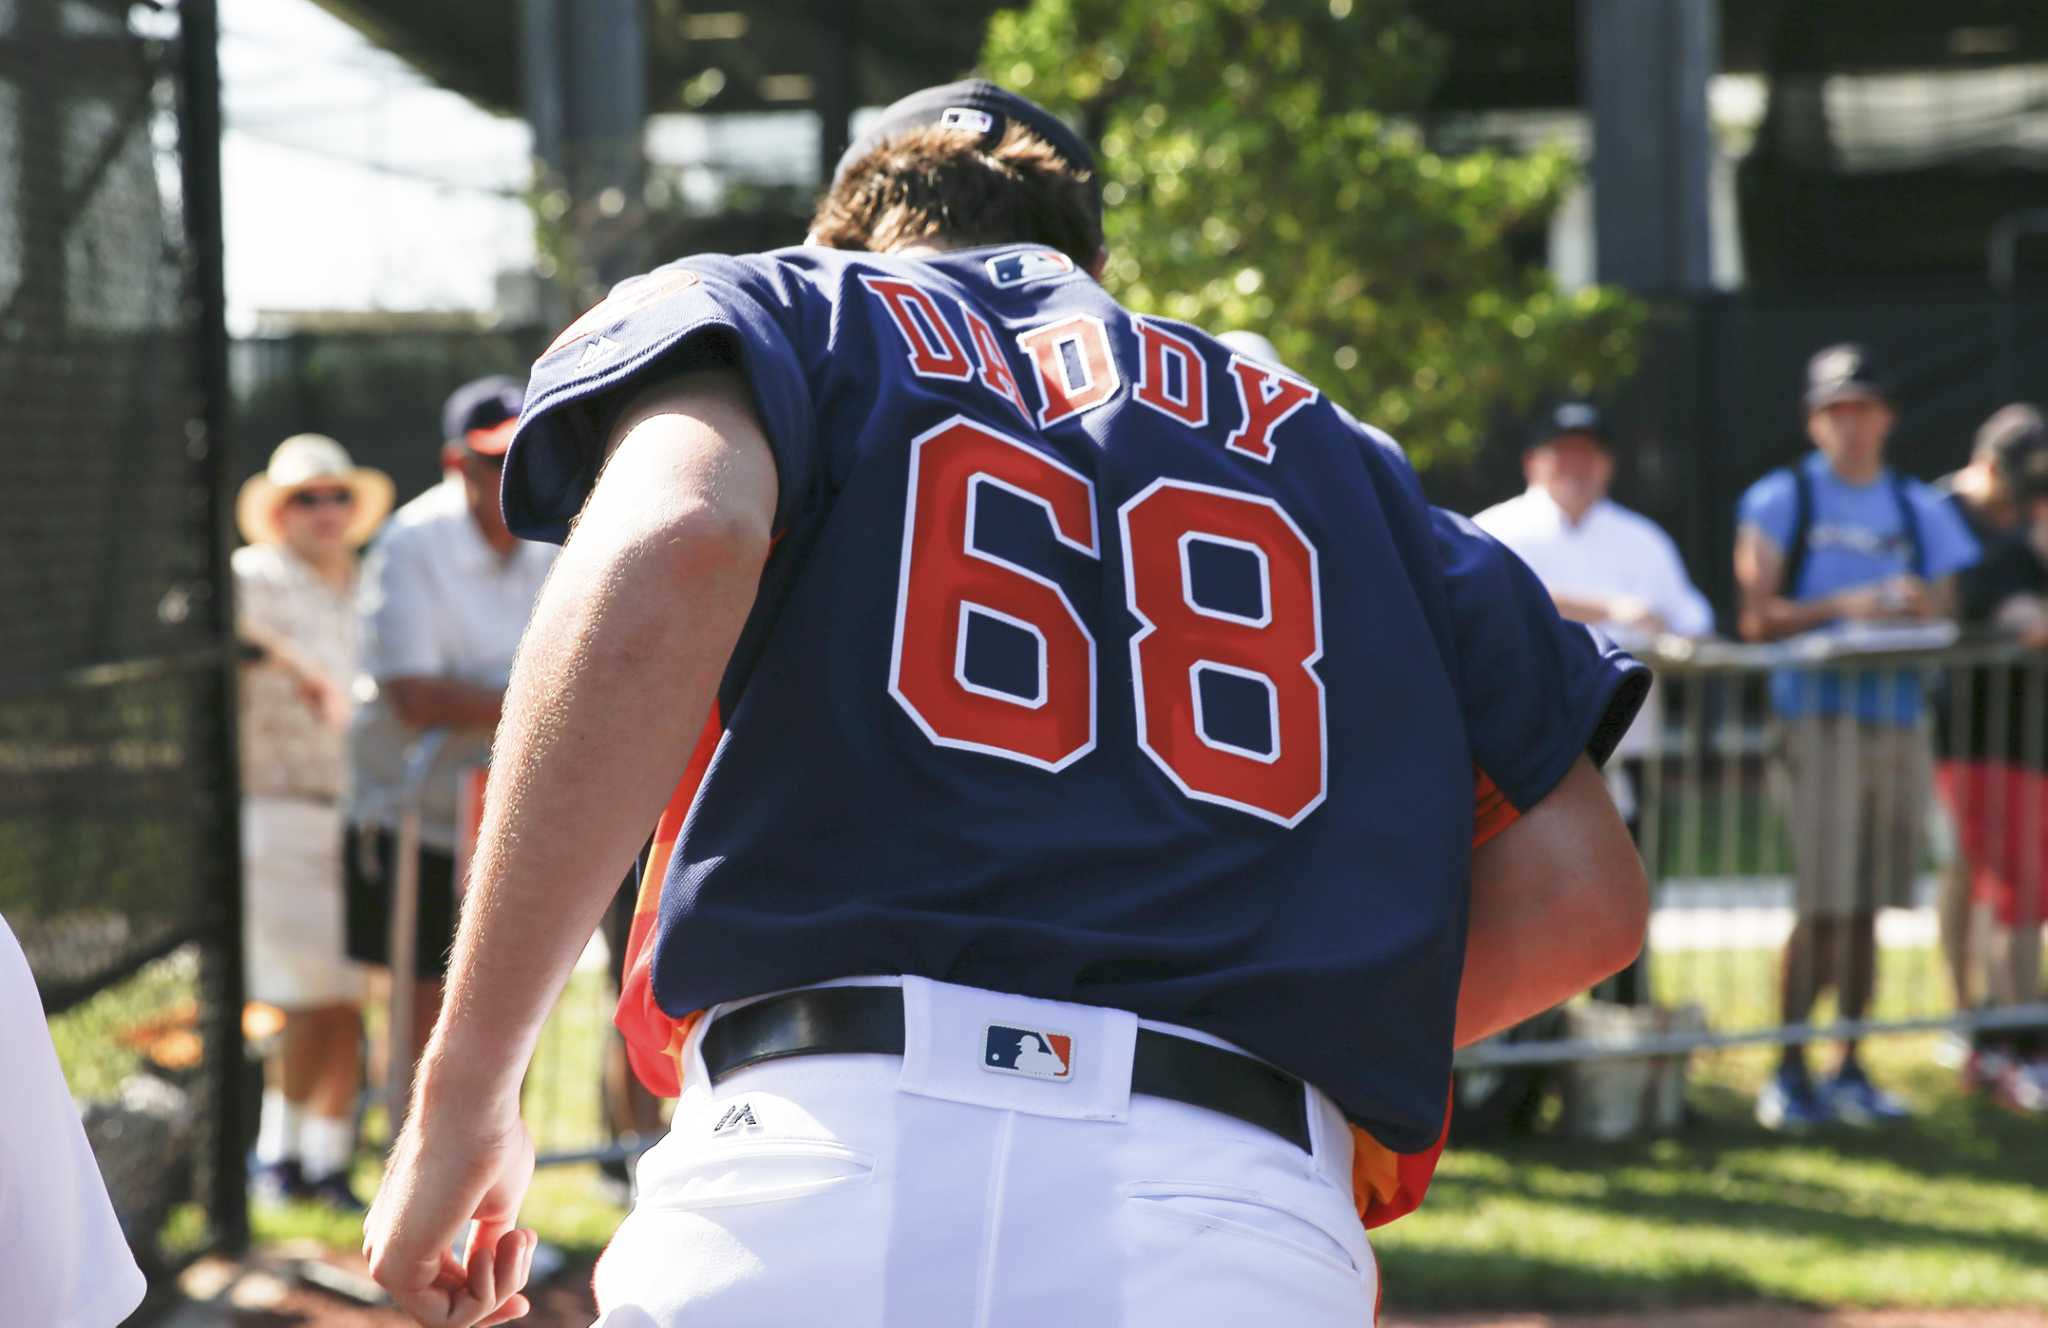 Inside the Astros' 'Daddy' jersey for Forrest Whitley